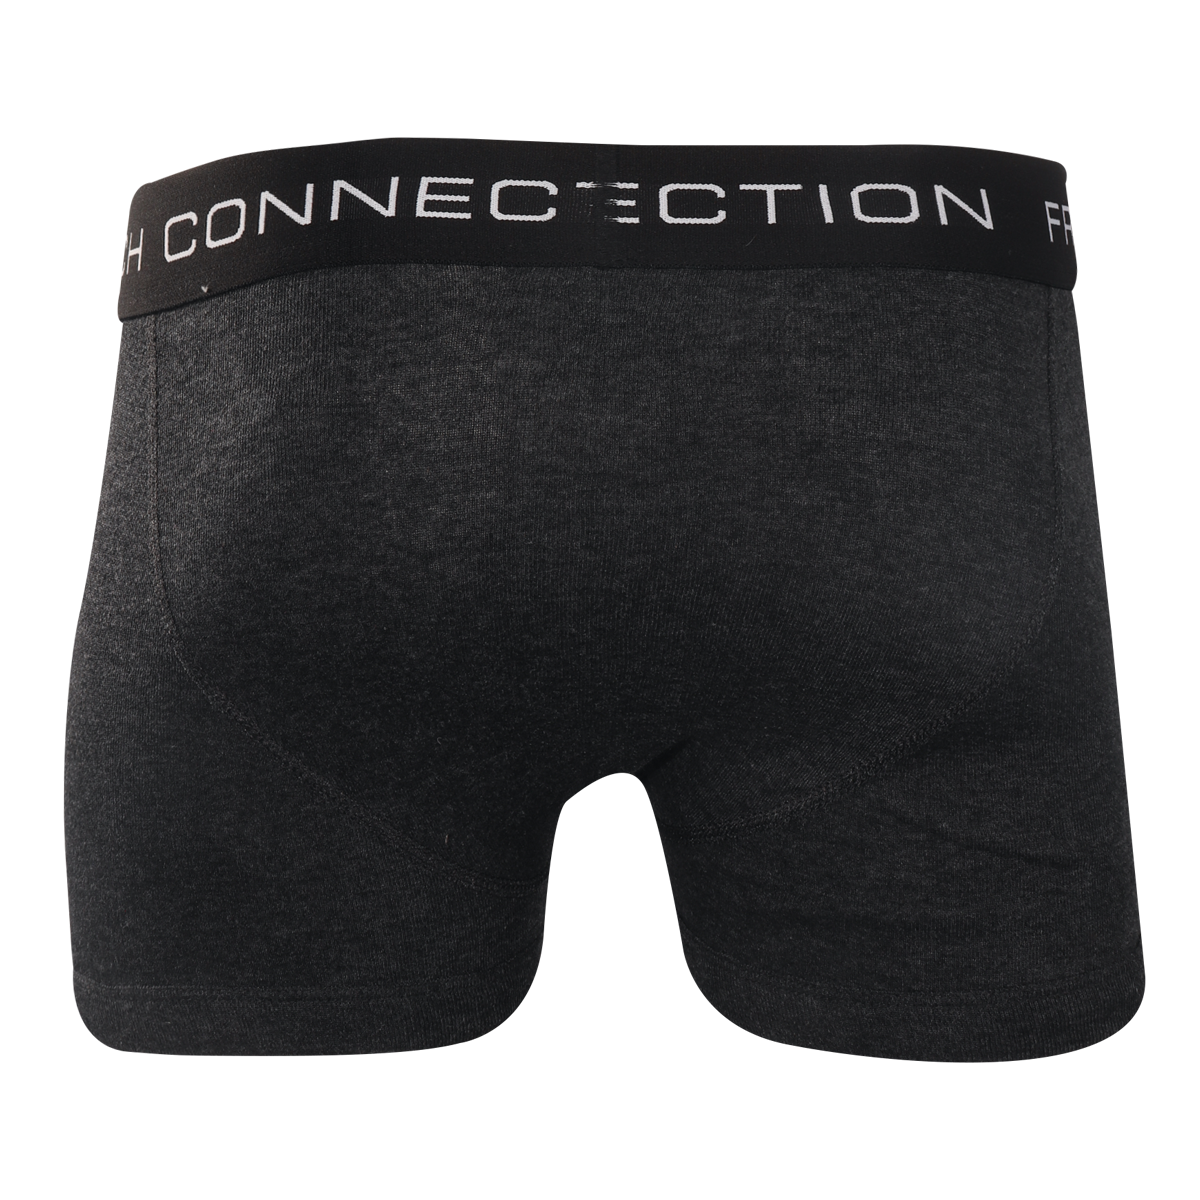 French Connection Men's Boxer Brief Single Pack Charcoal Grey (S32)